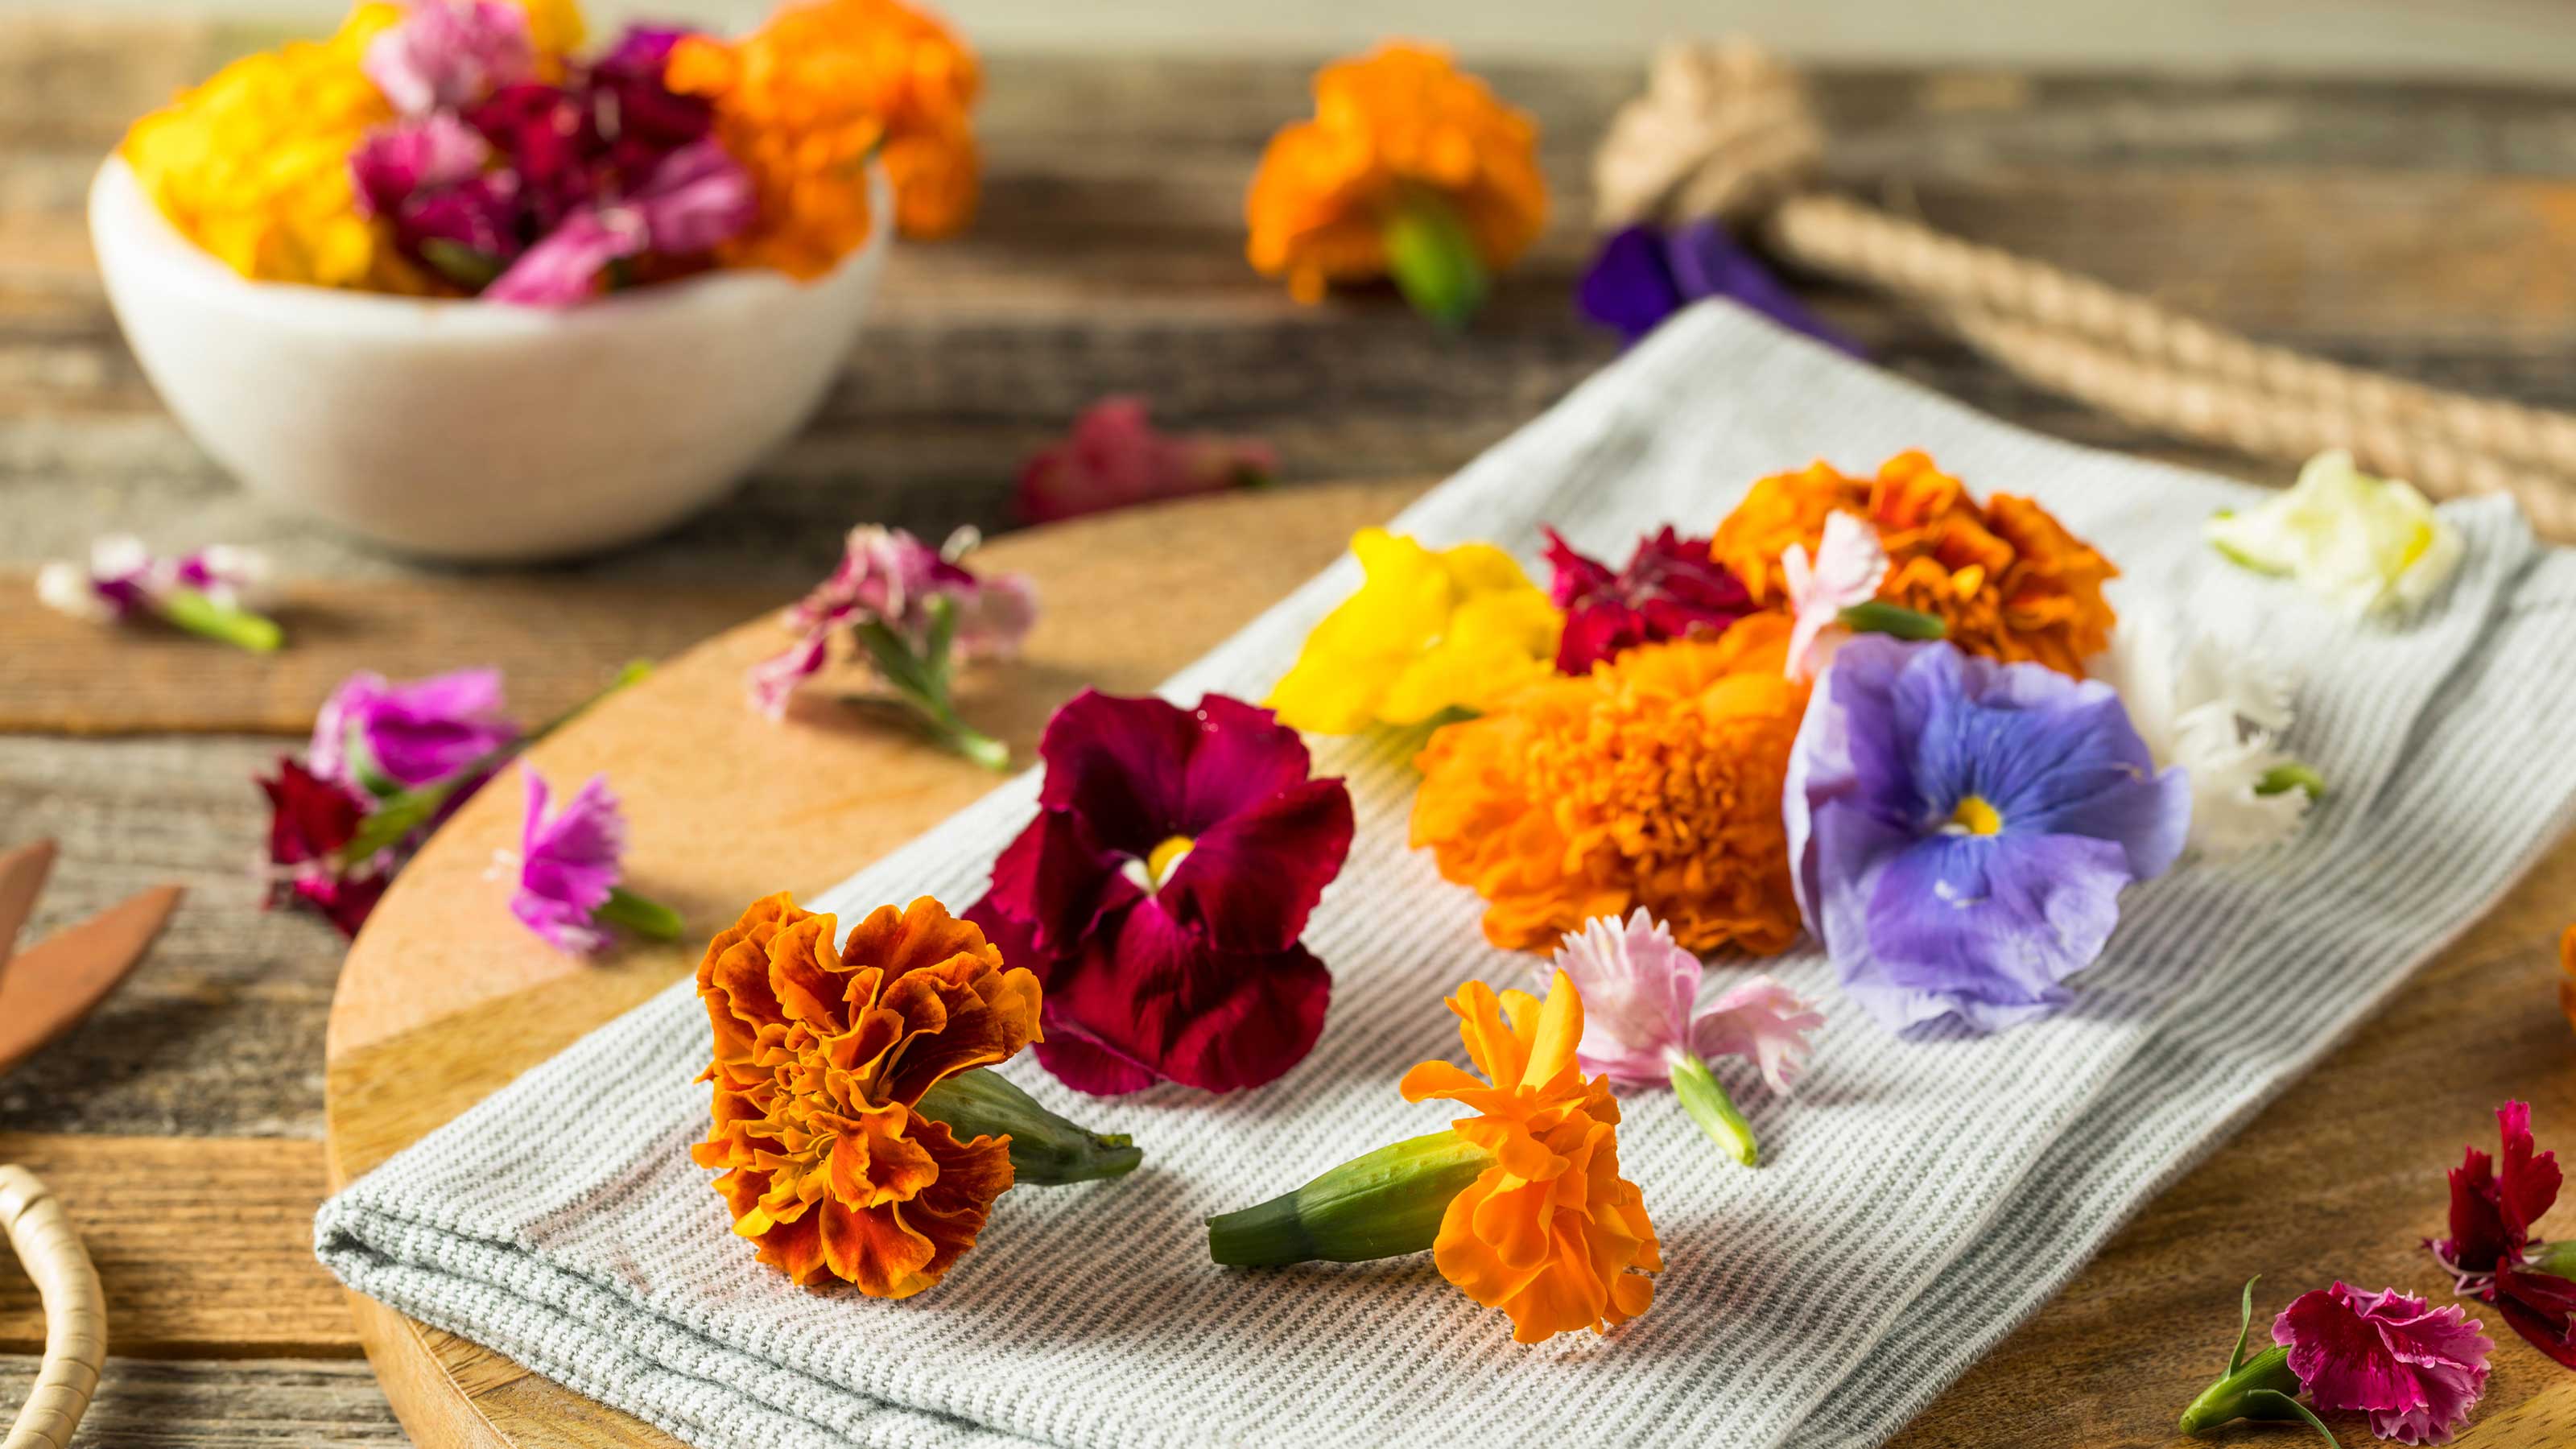 How to use edible flowers: top tips to try